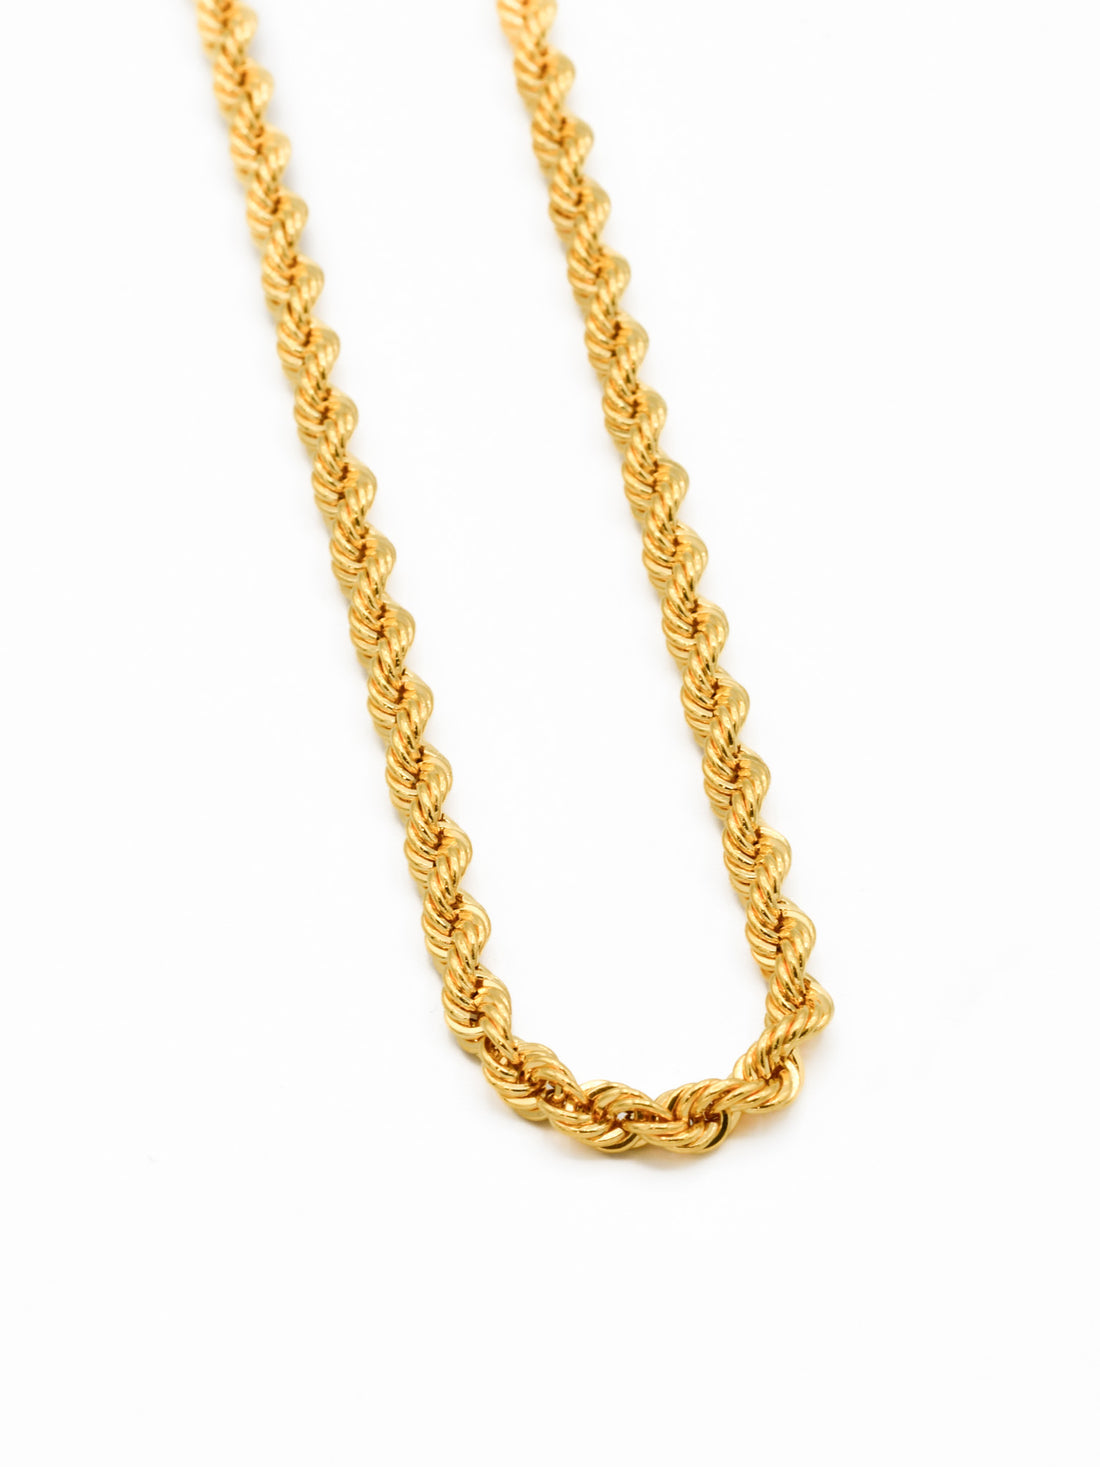 22ct Gold Hollow Rope Chain - Roop Darshan